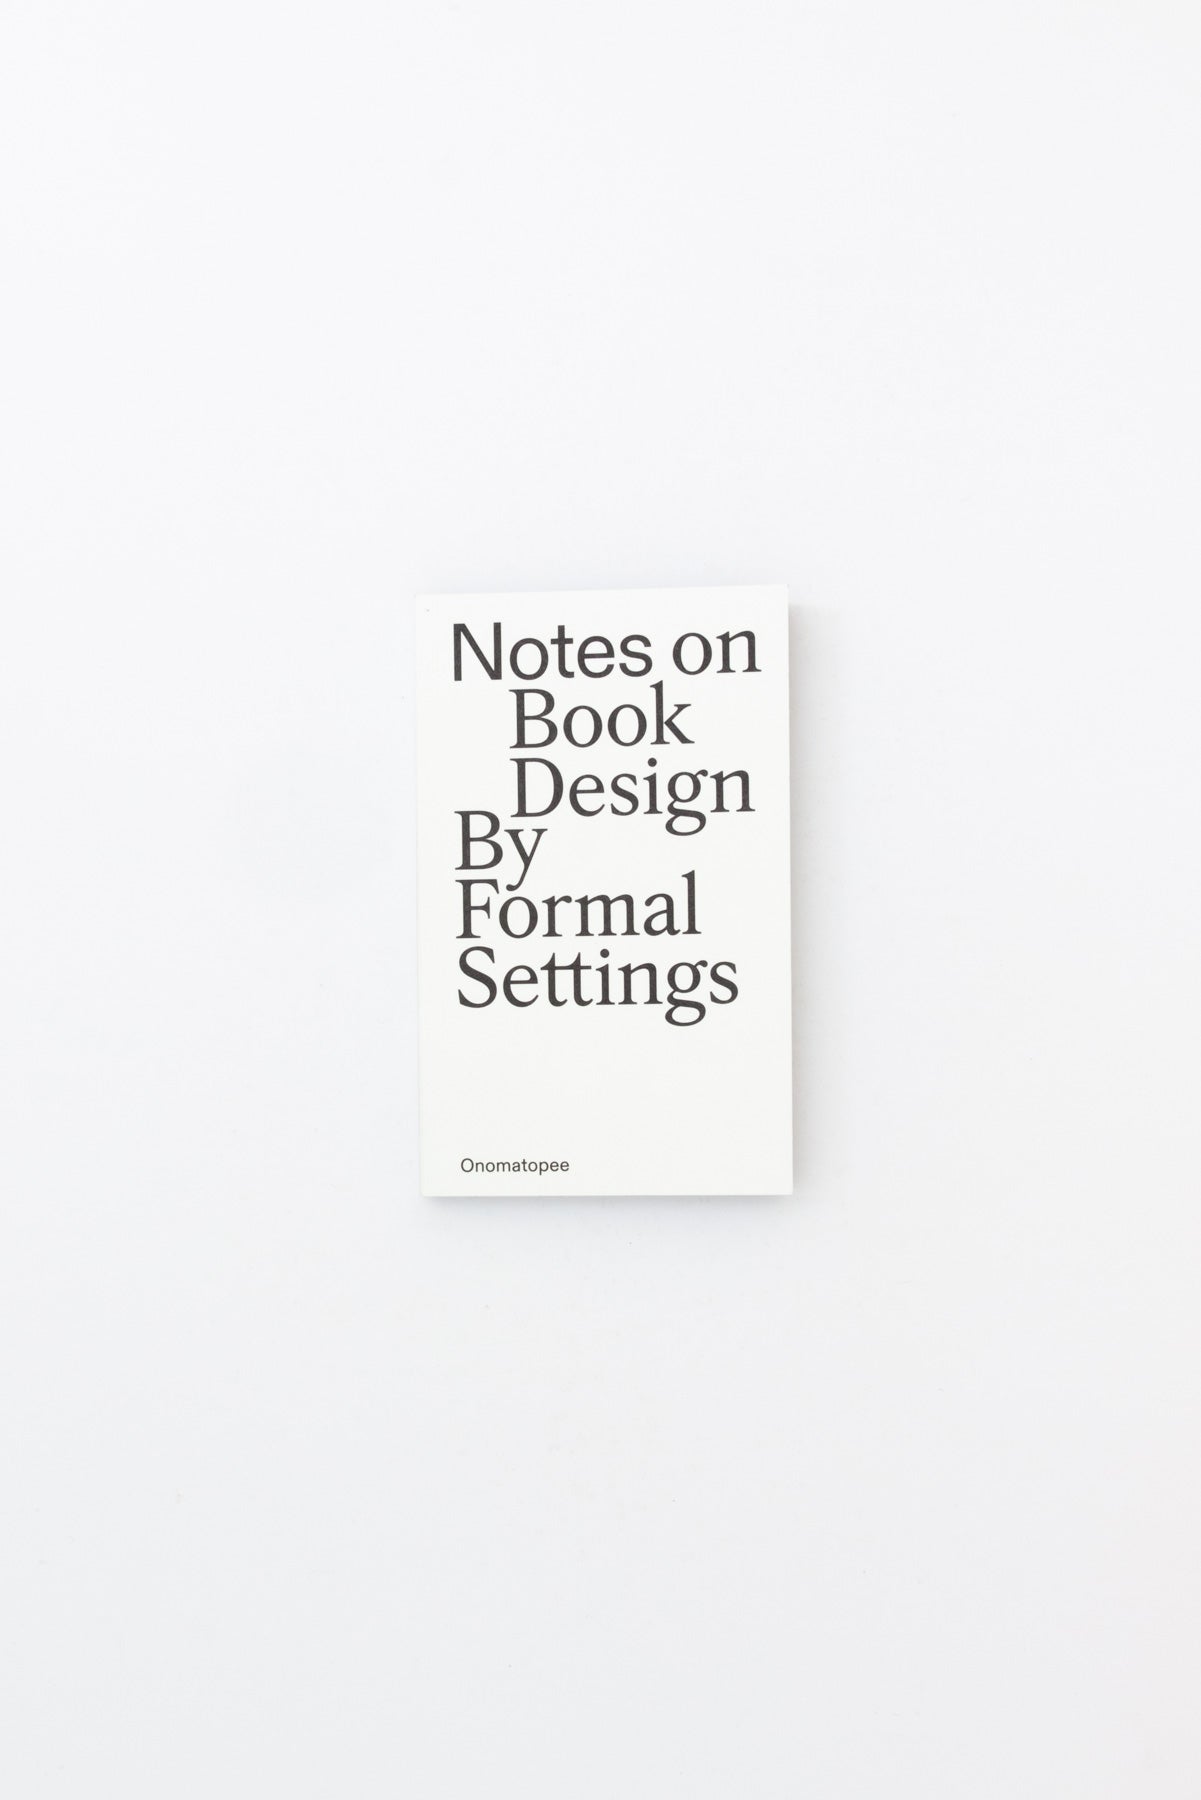 Notes on Book Design - Formal Settings